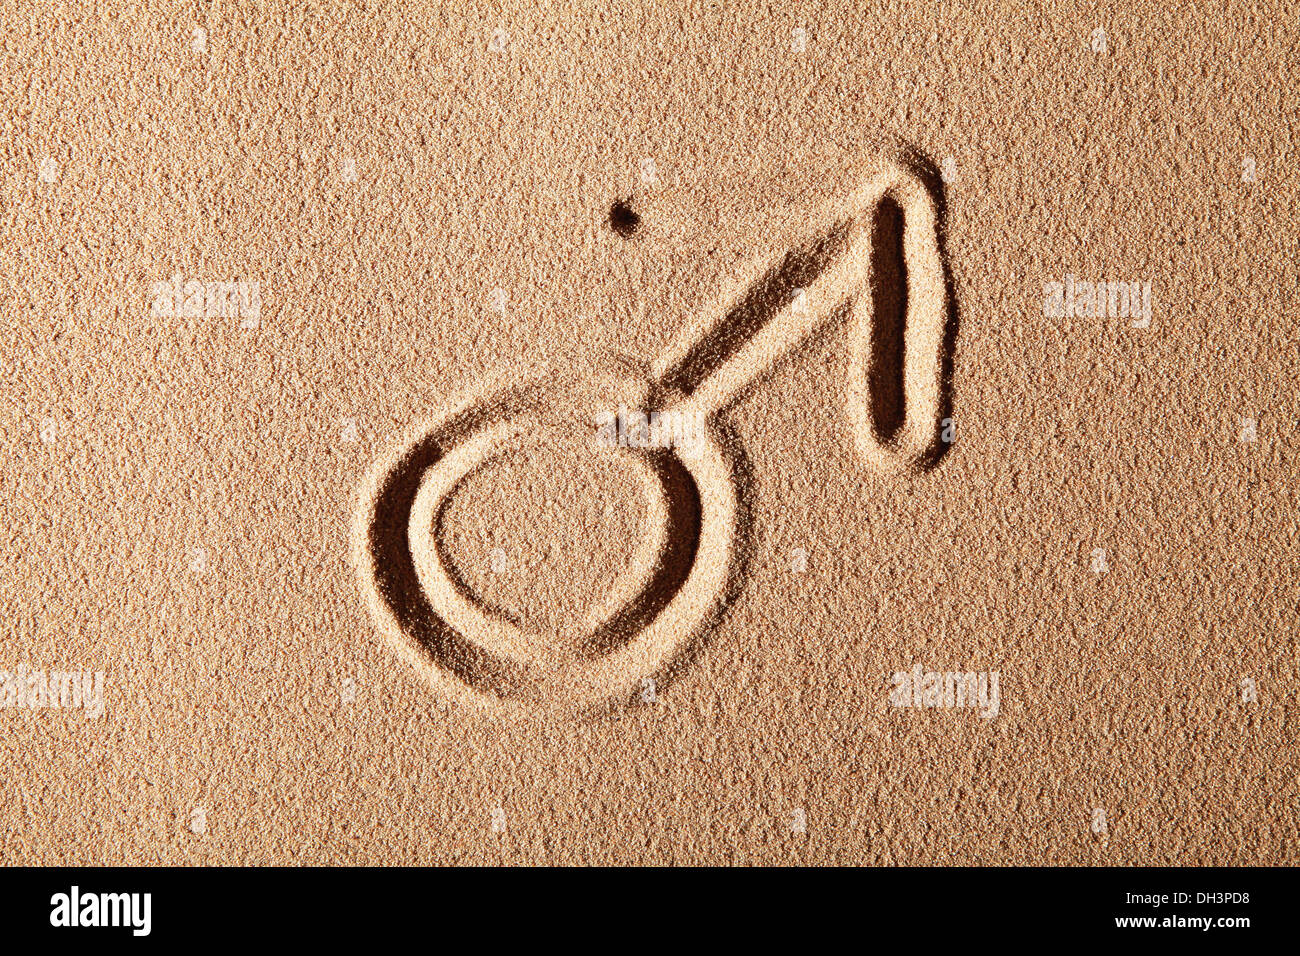 Mars sign, symbol of masculinity, drawn in sand Stock Photo